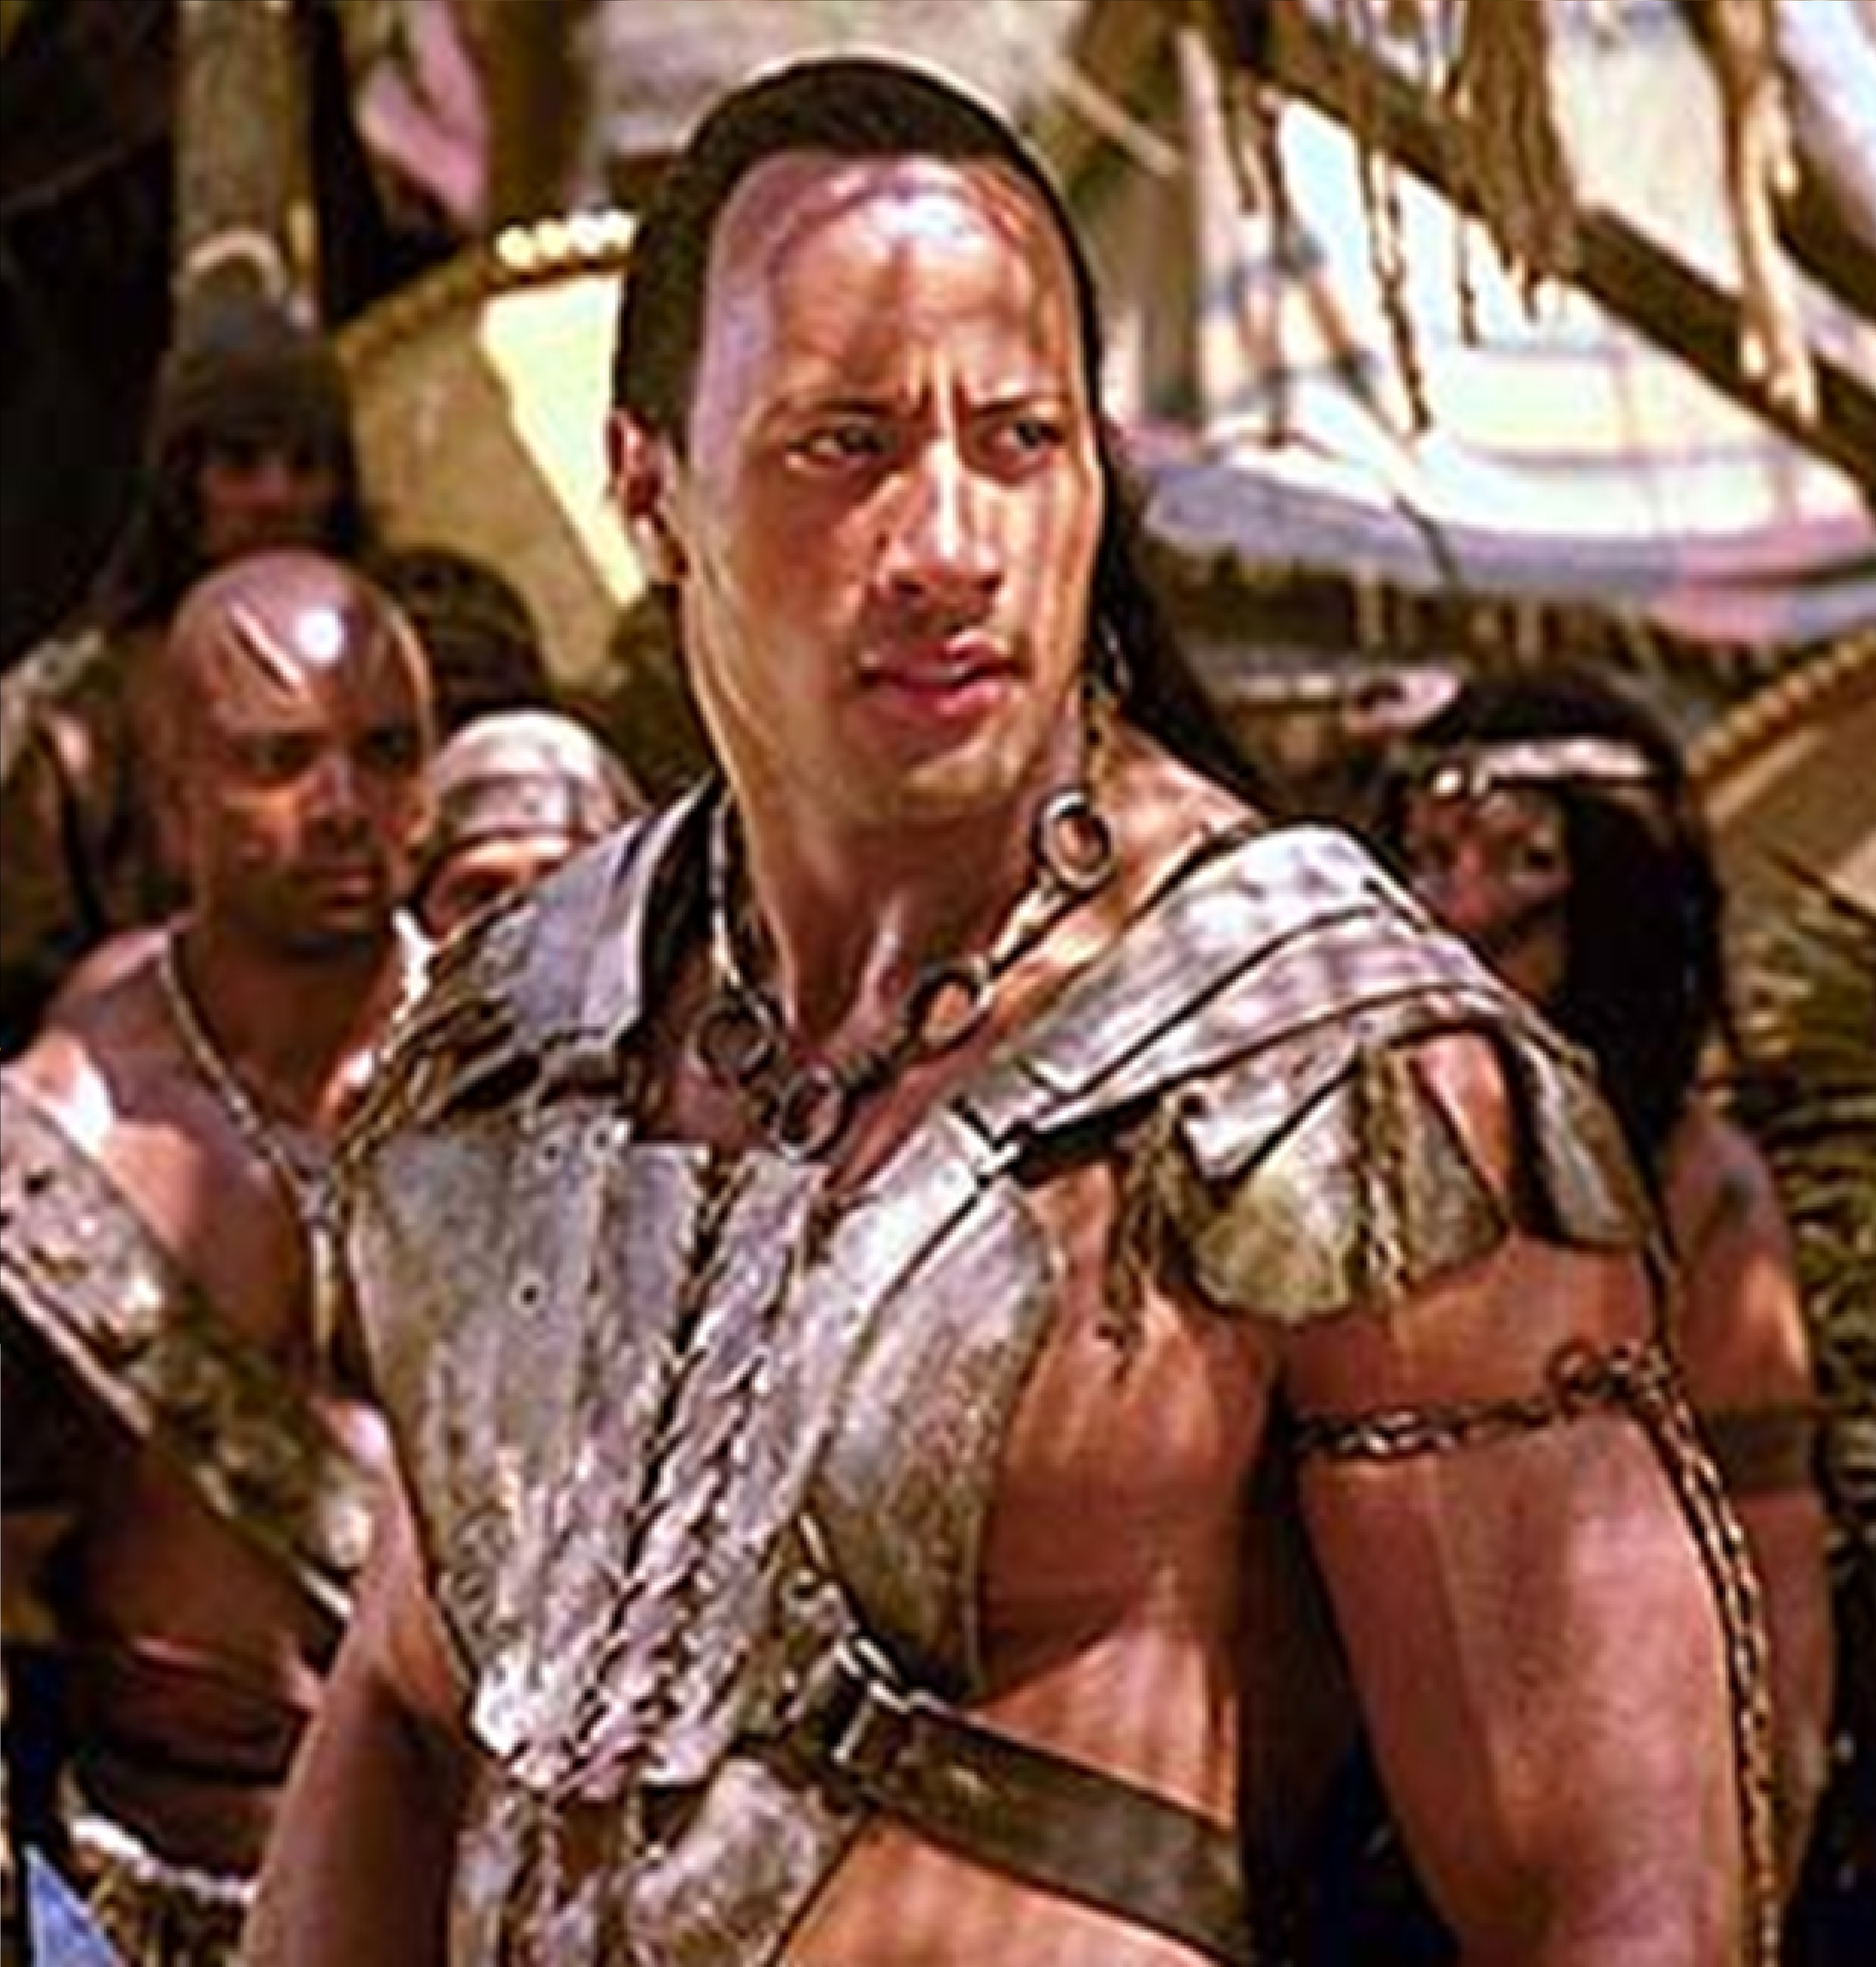 Download The Scorpion King 2002 Torrents 1337x